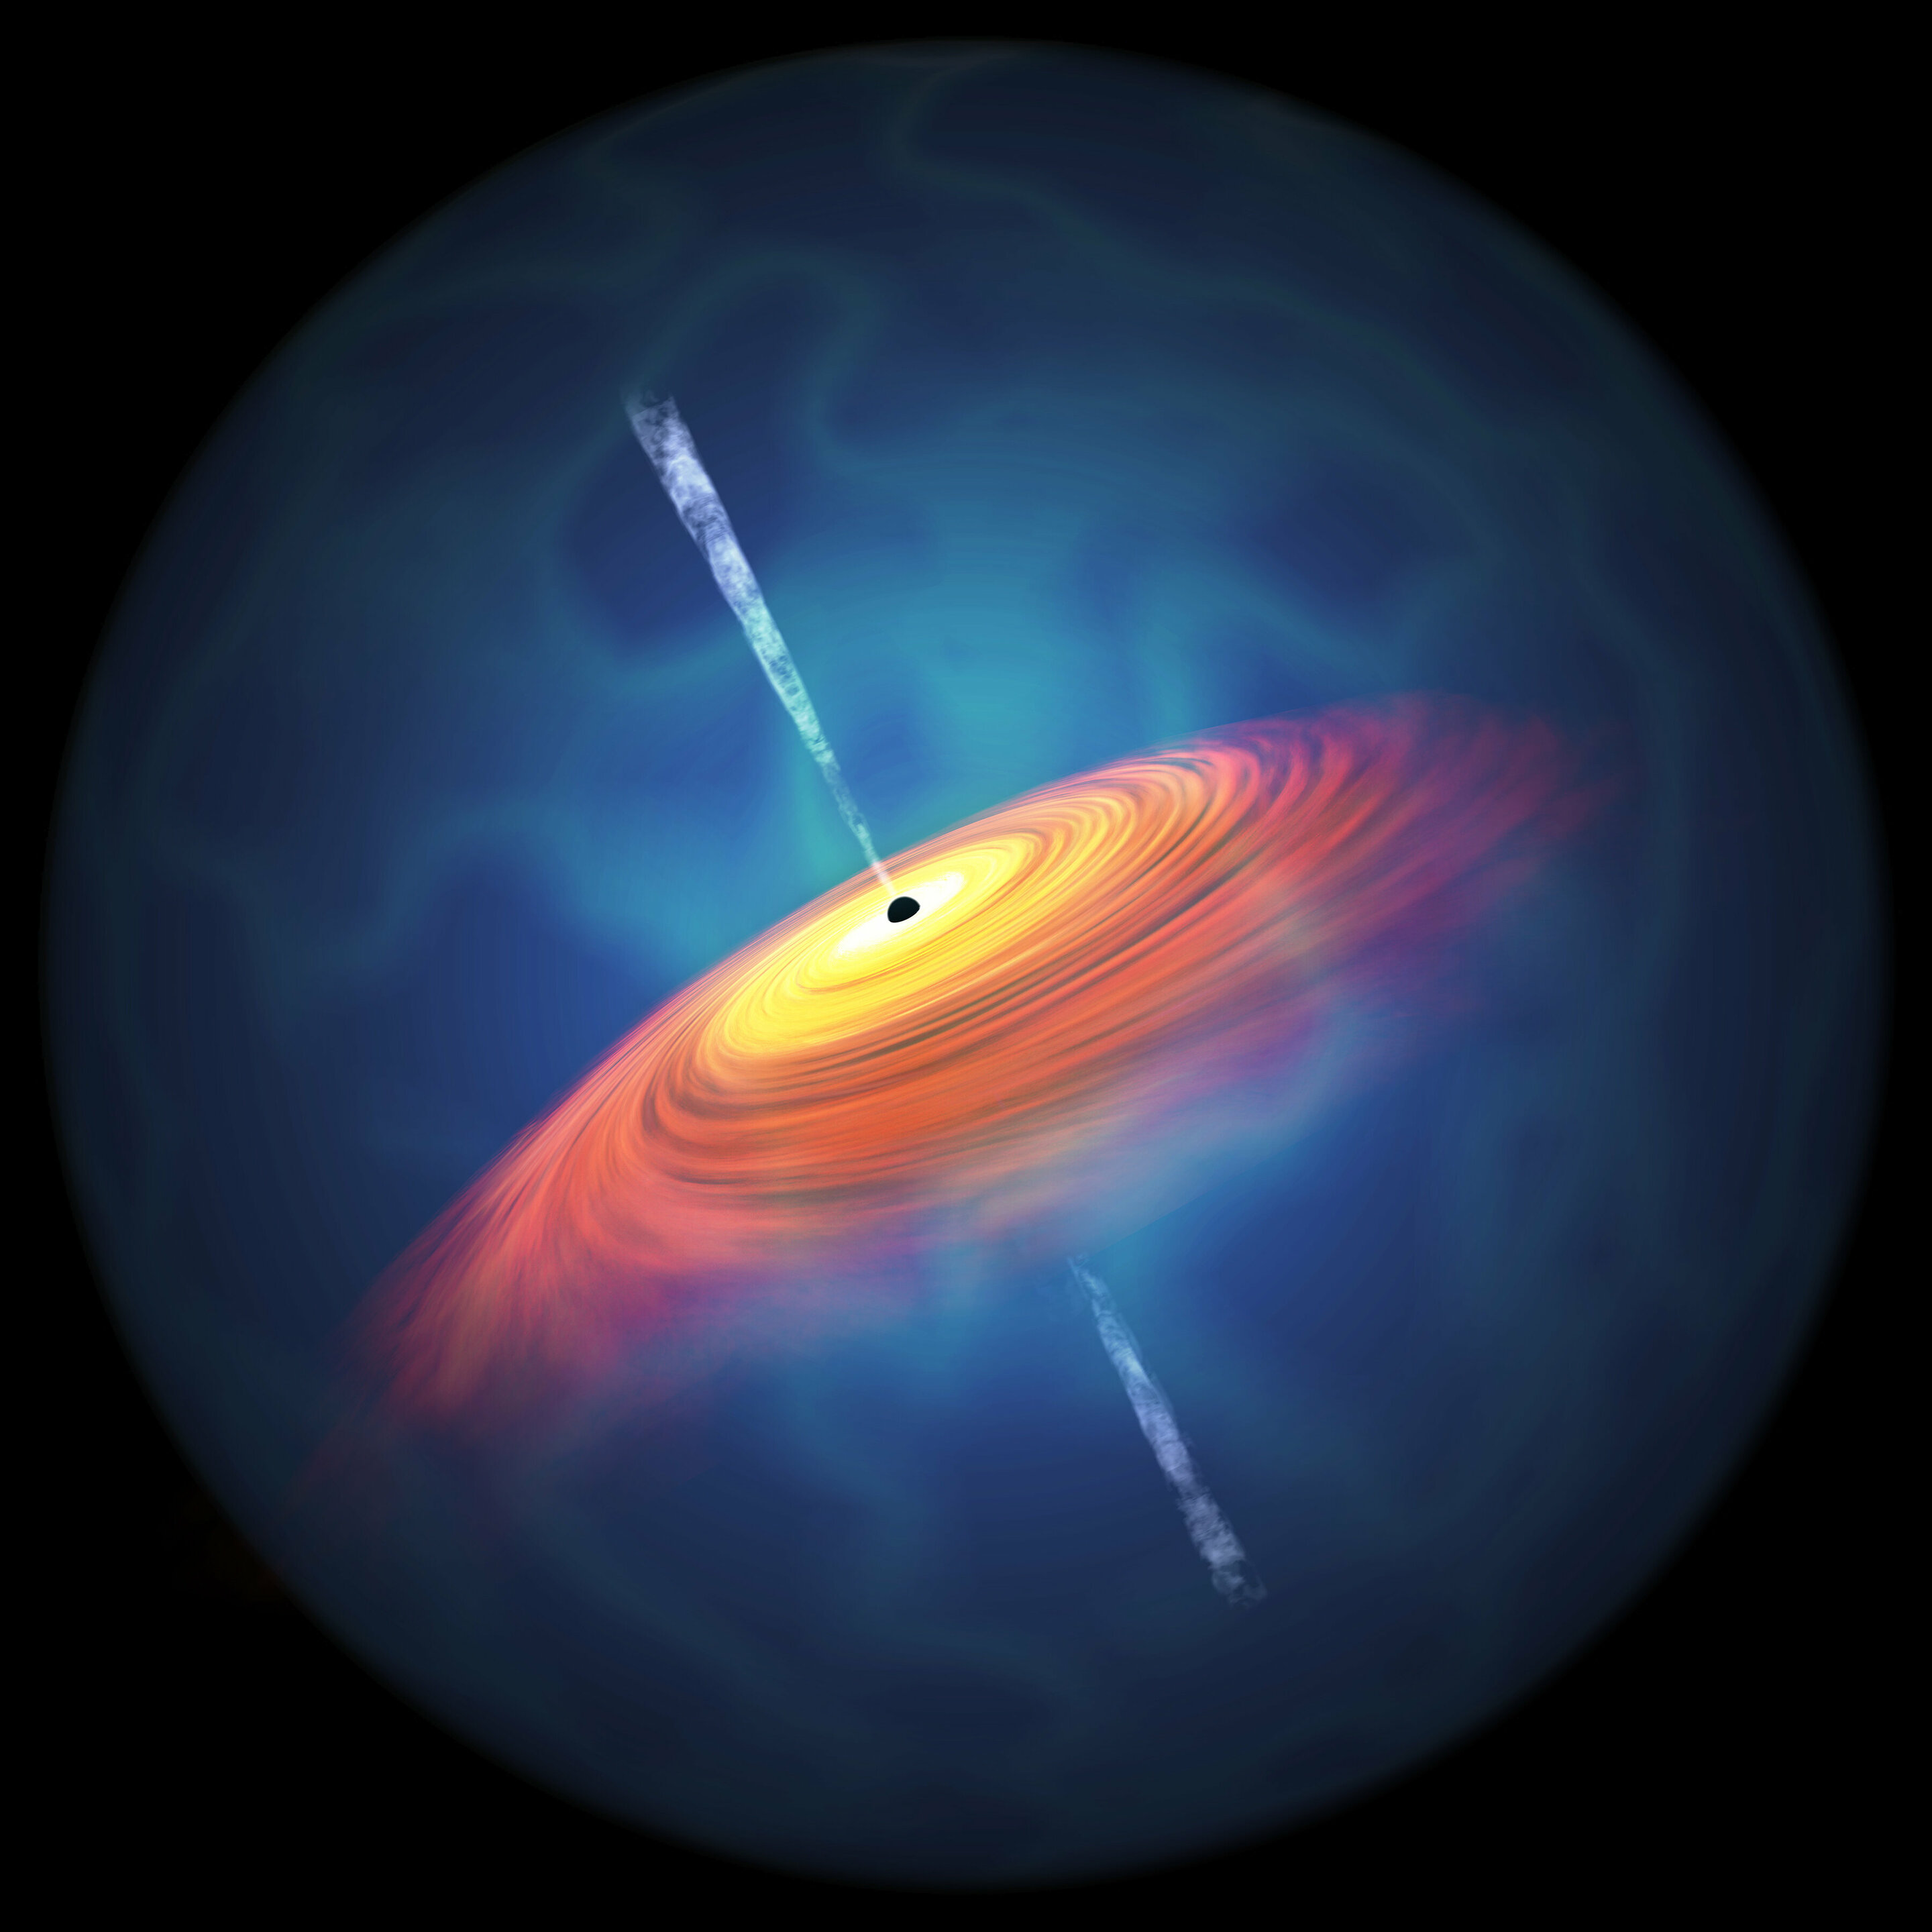 Astronomers Discover 83 Supermassive Black Holes In The Early Universe